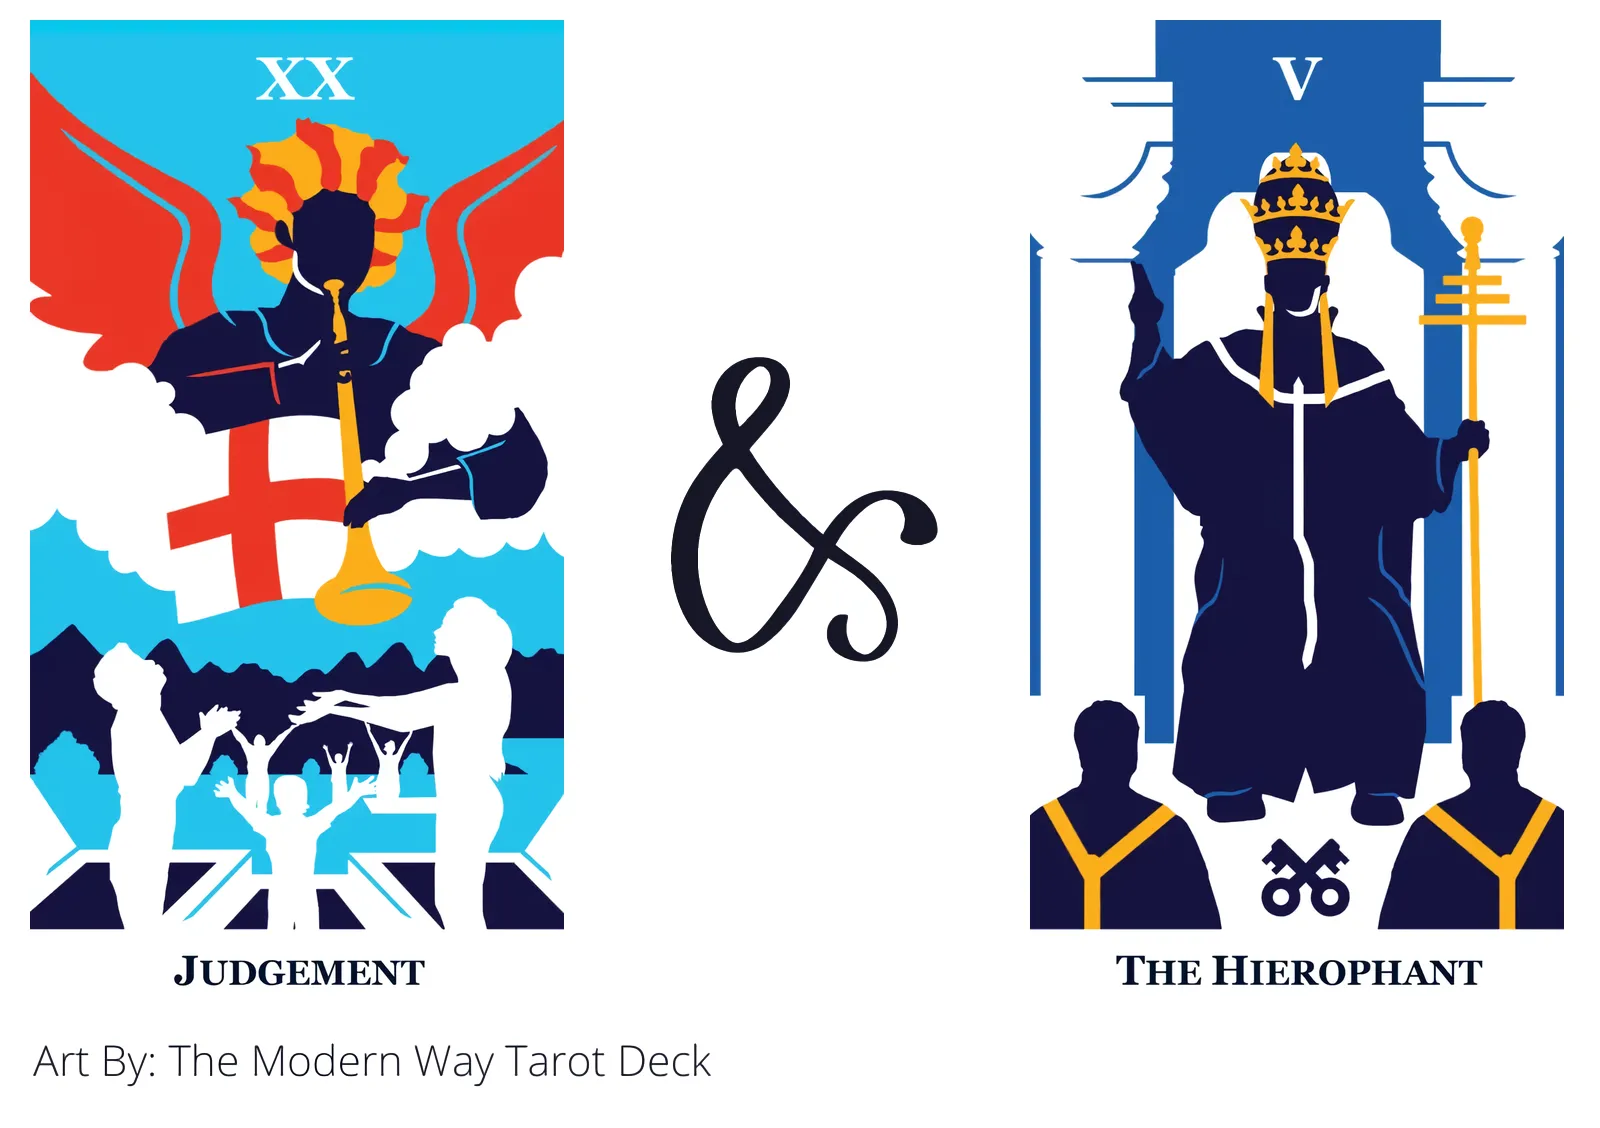 judgement and the hierophant tarot cards together